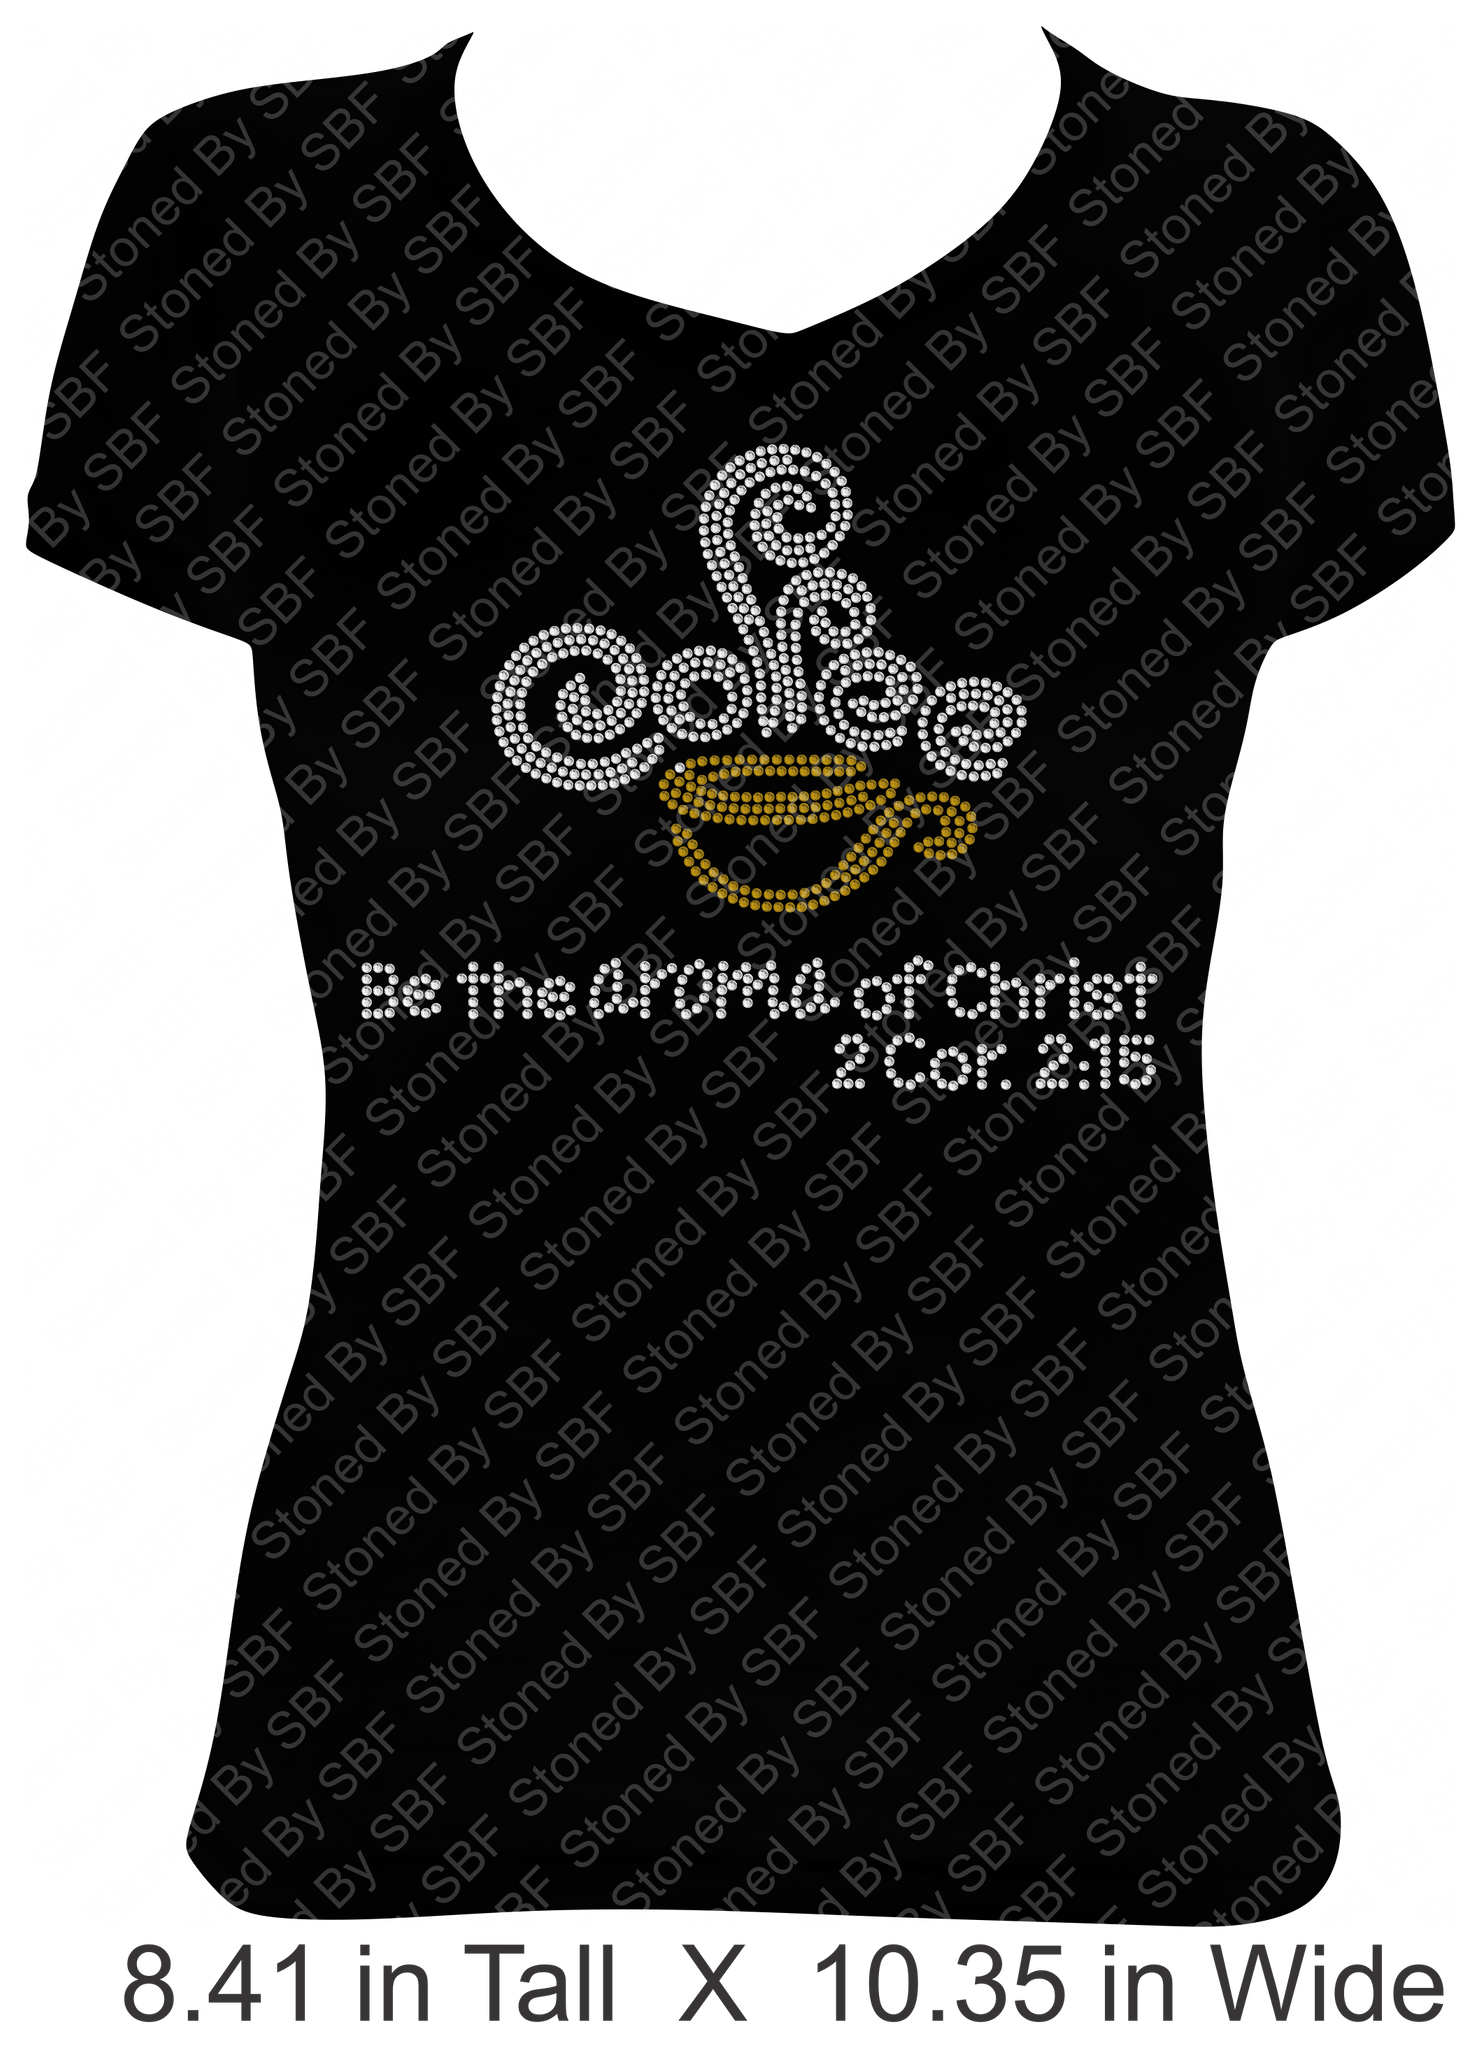 Be The Aroma Of Christ